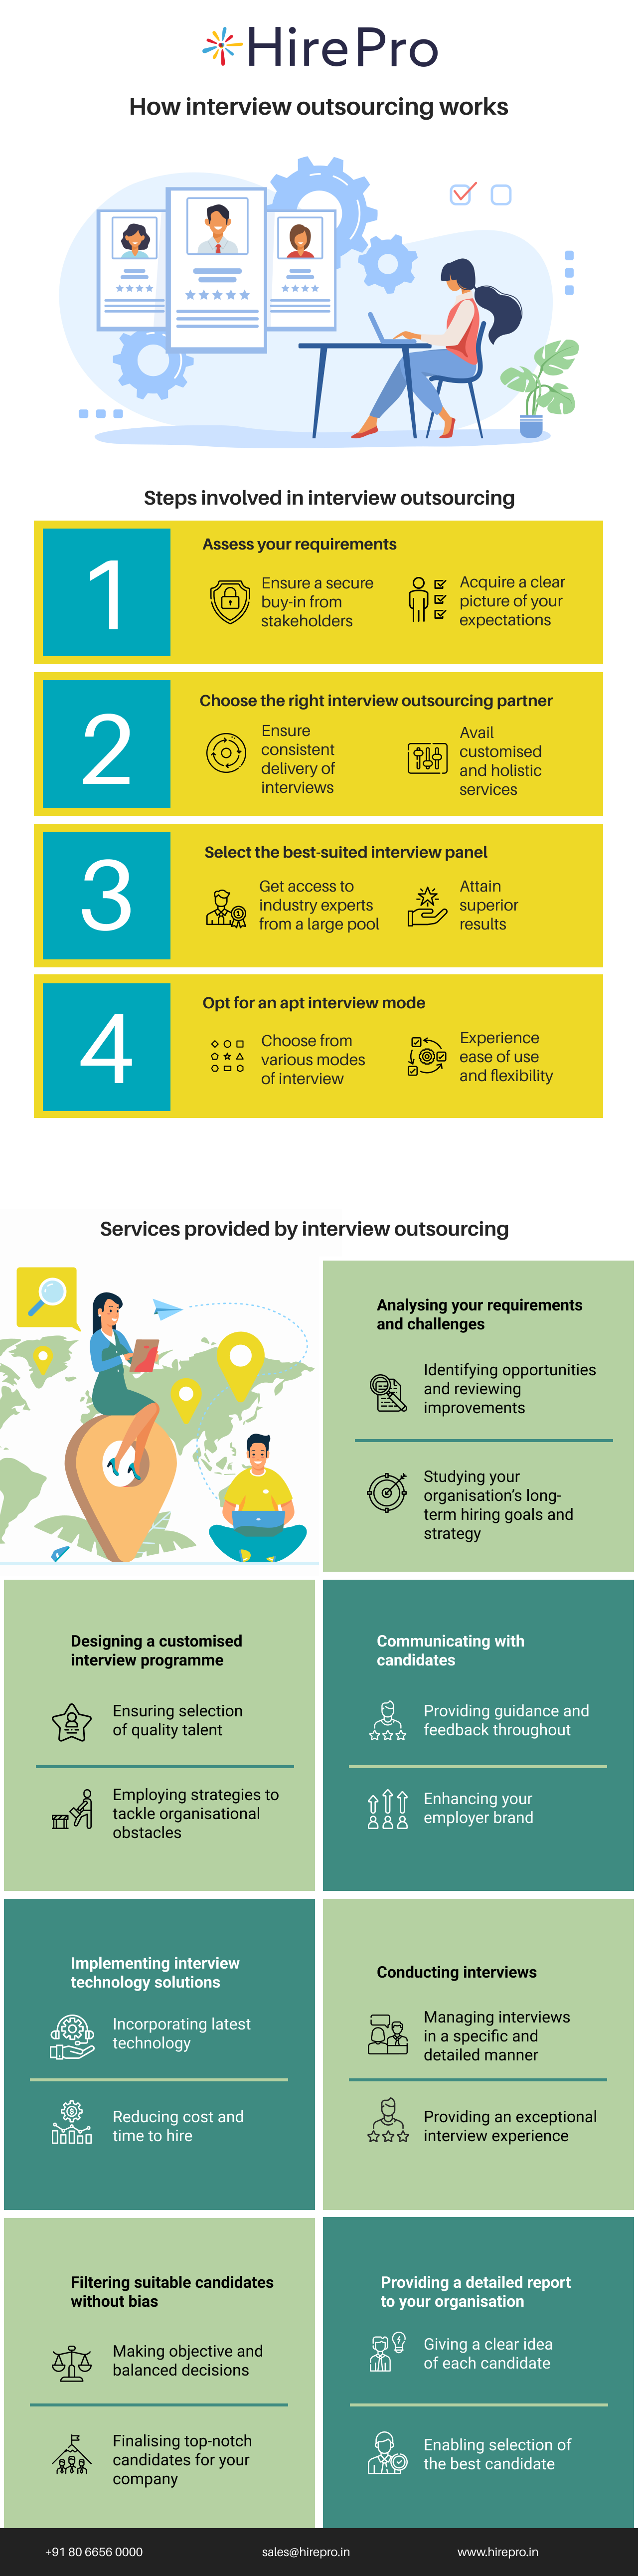 How interview outsourcing works